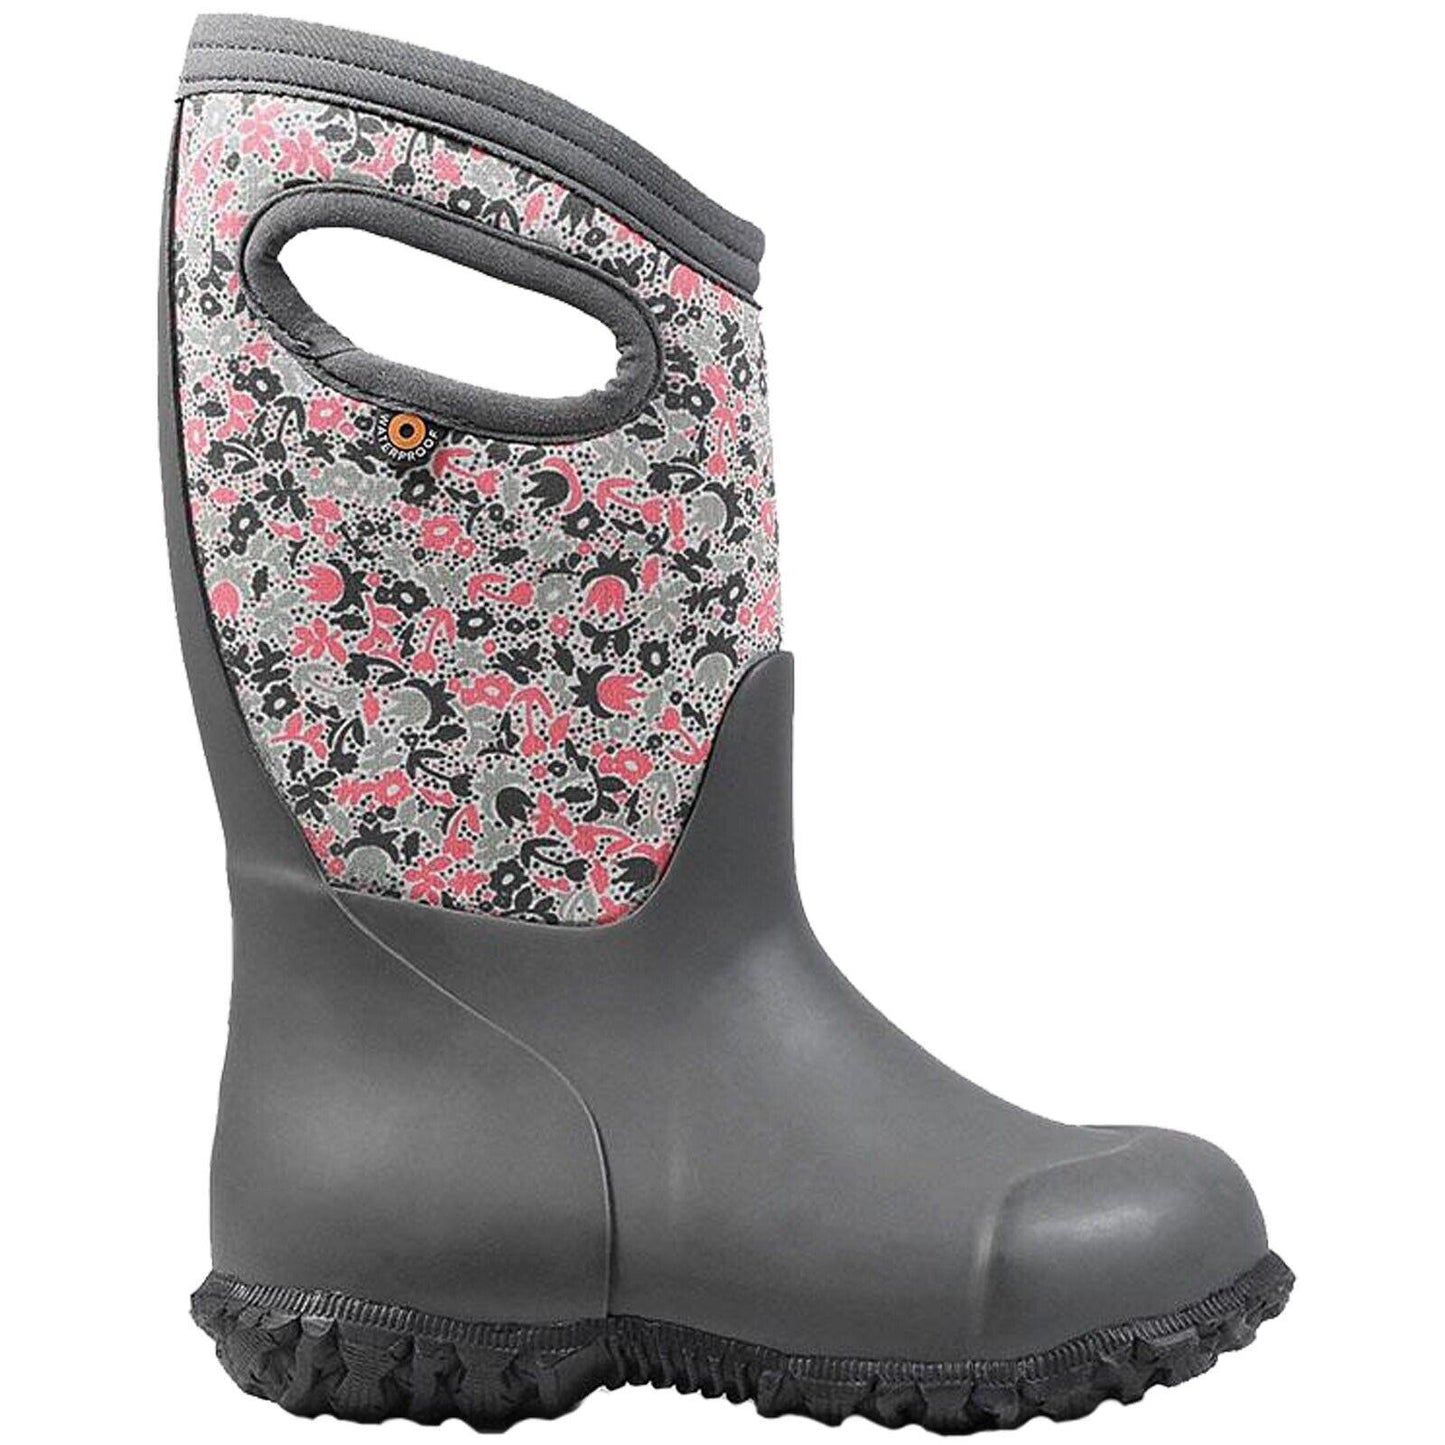 Girls Bogs York Freckle Grey Multi Insulated Warm Wellies Boot 78710 062